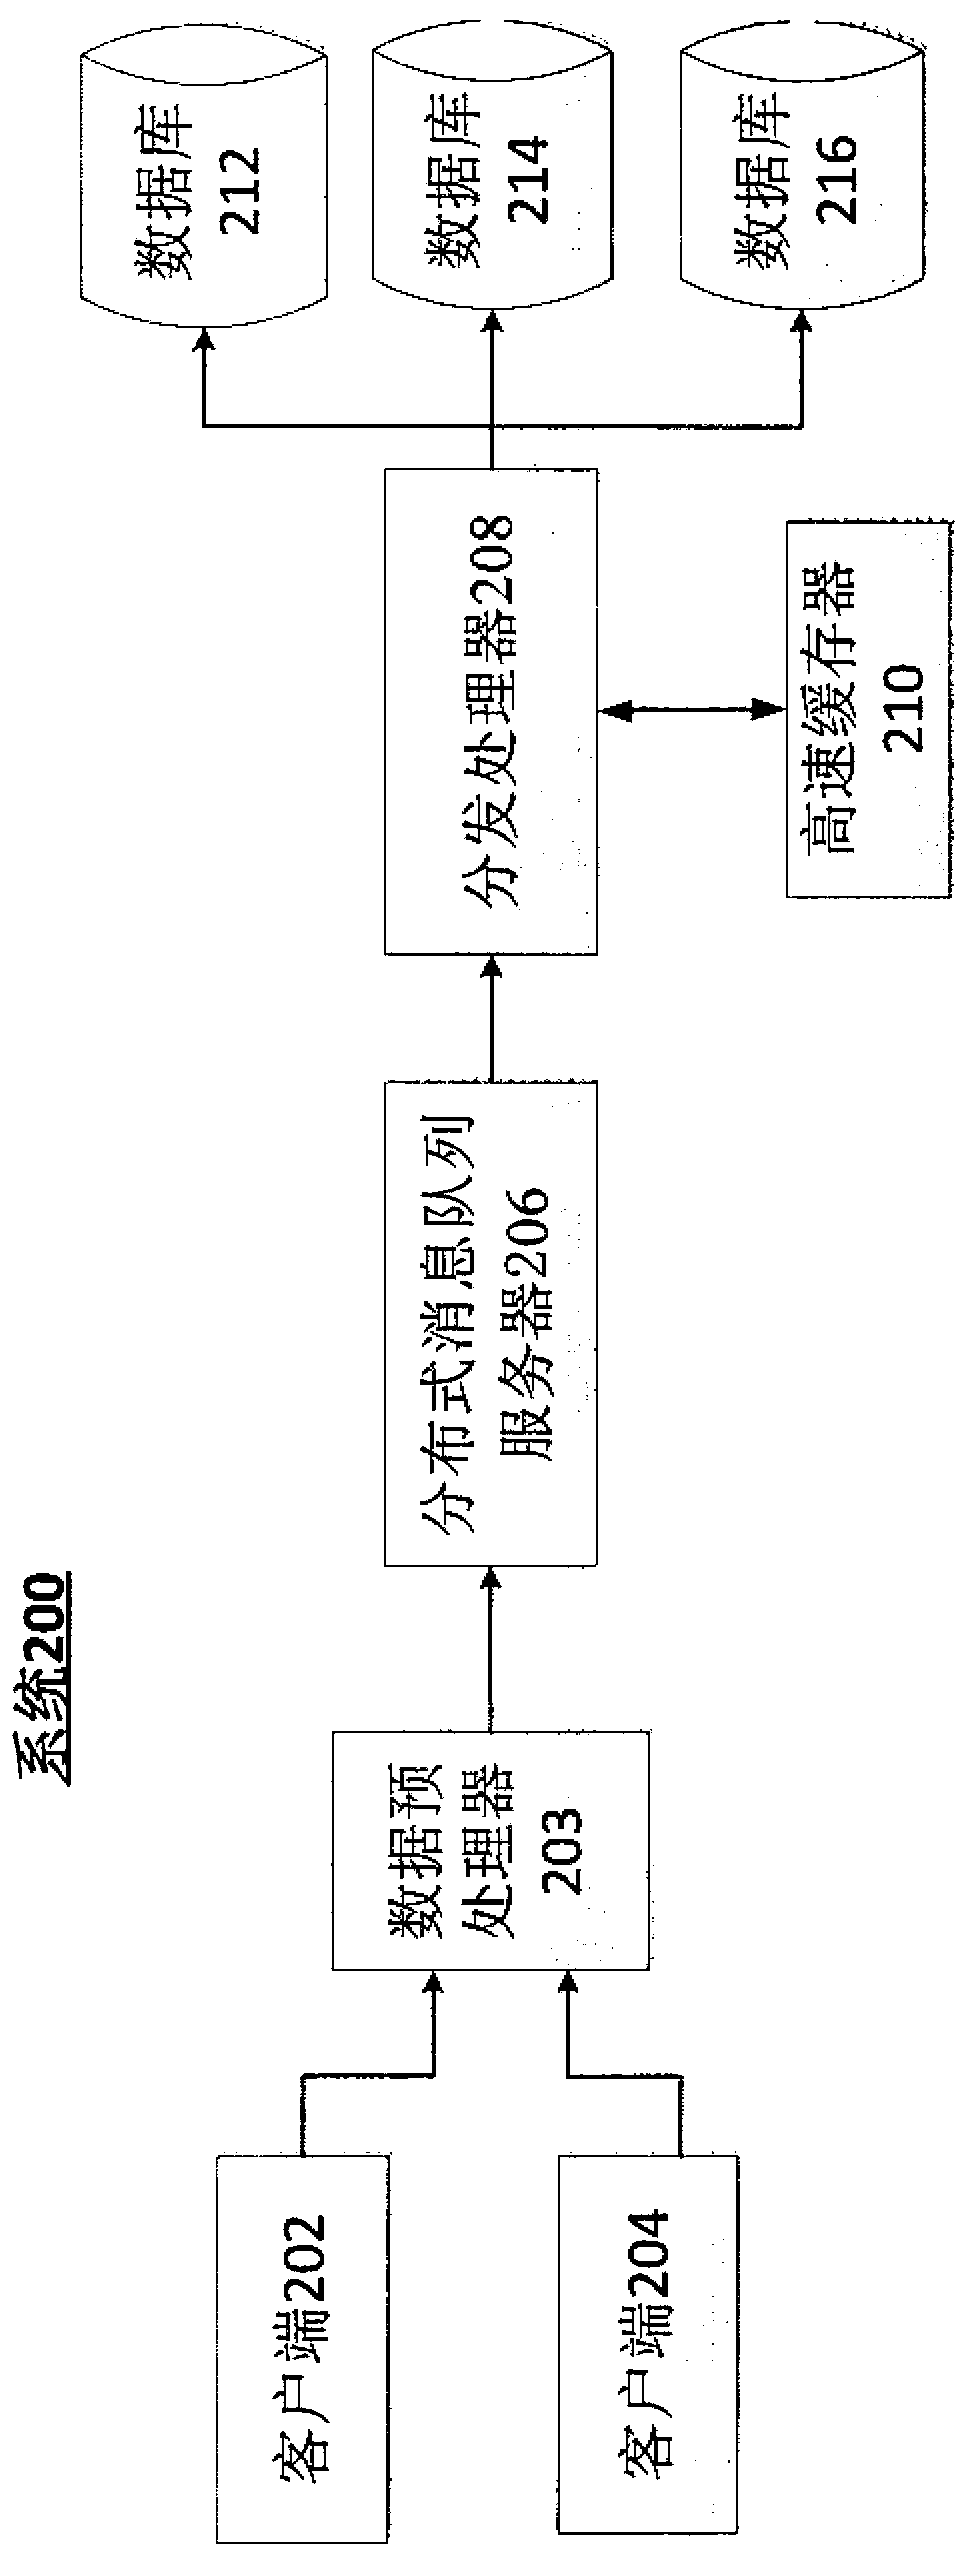 Method and system for distributing and processing mass data passing through message queues